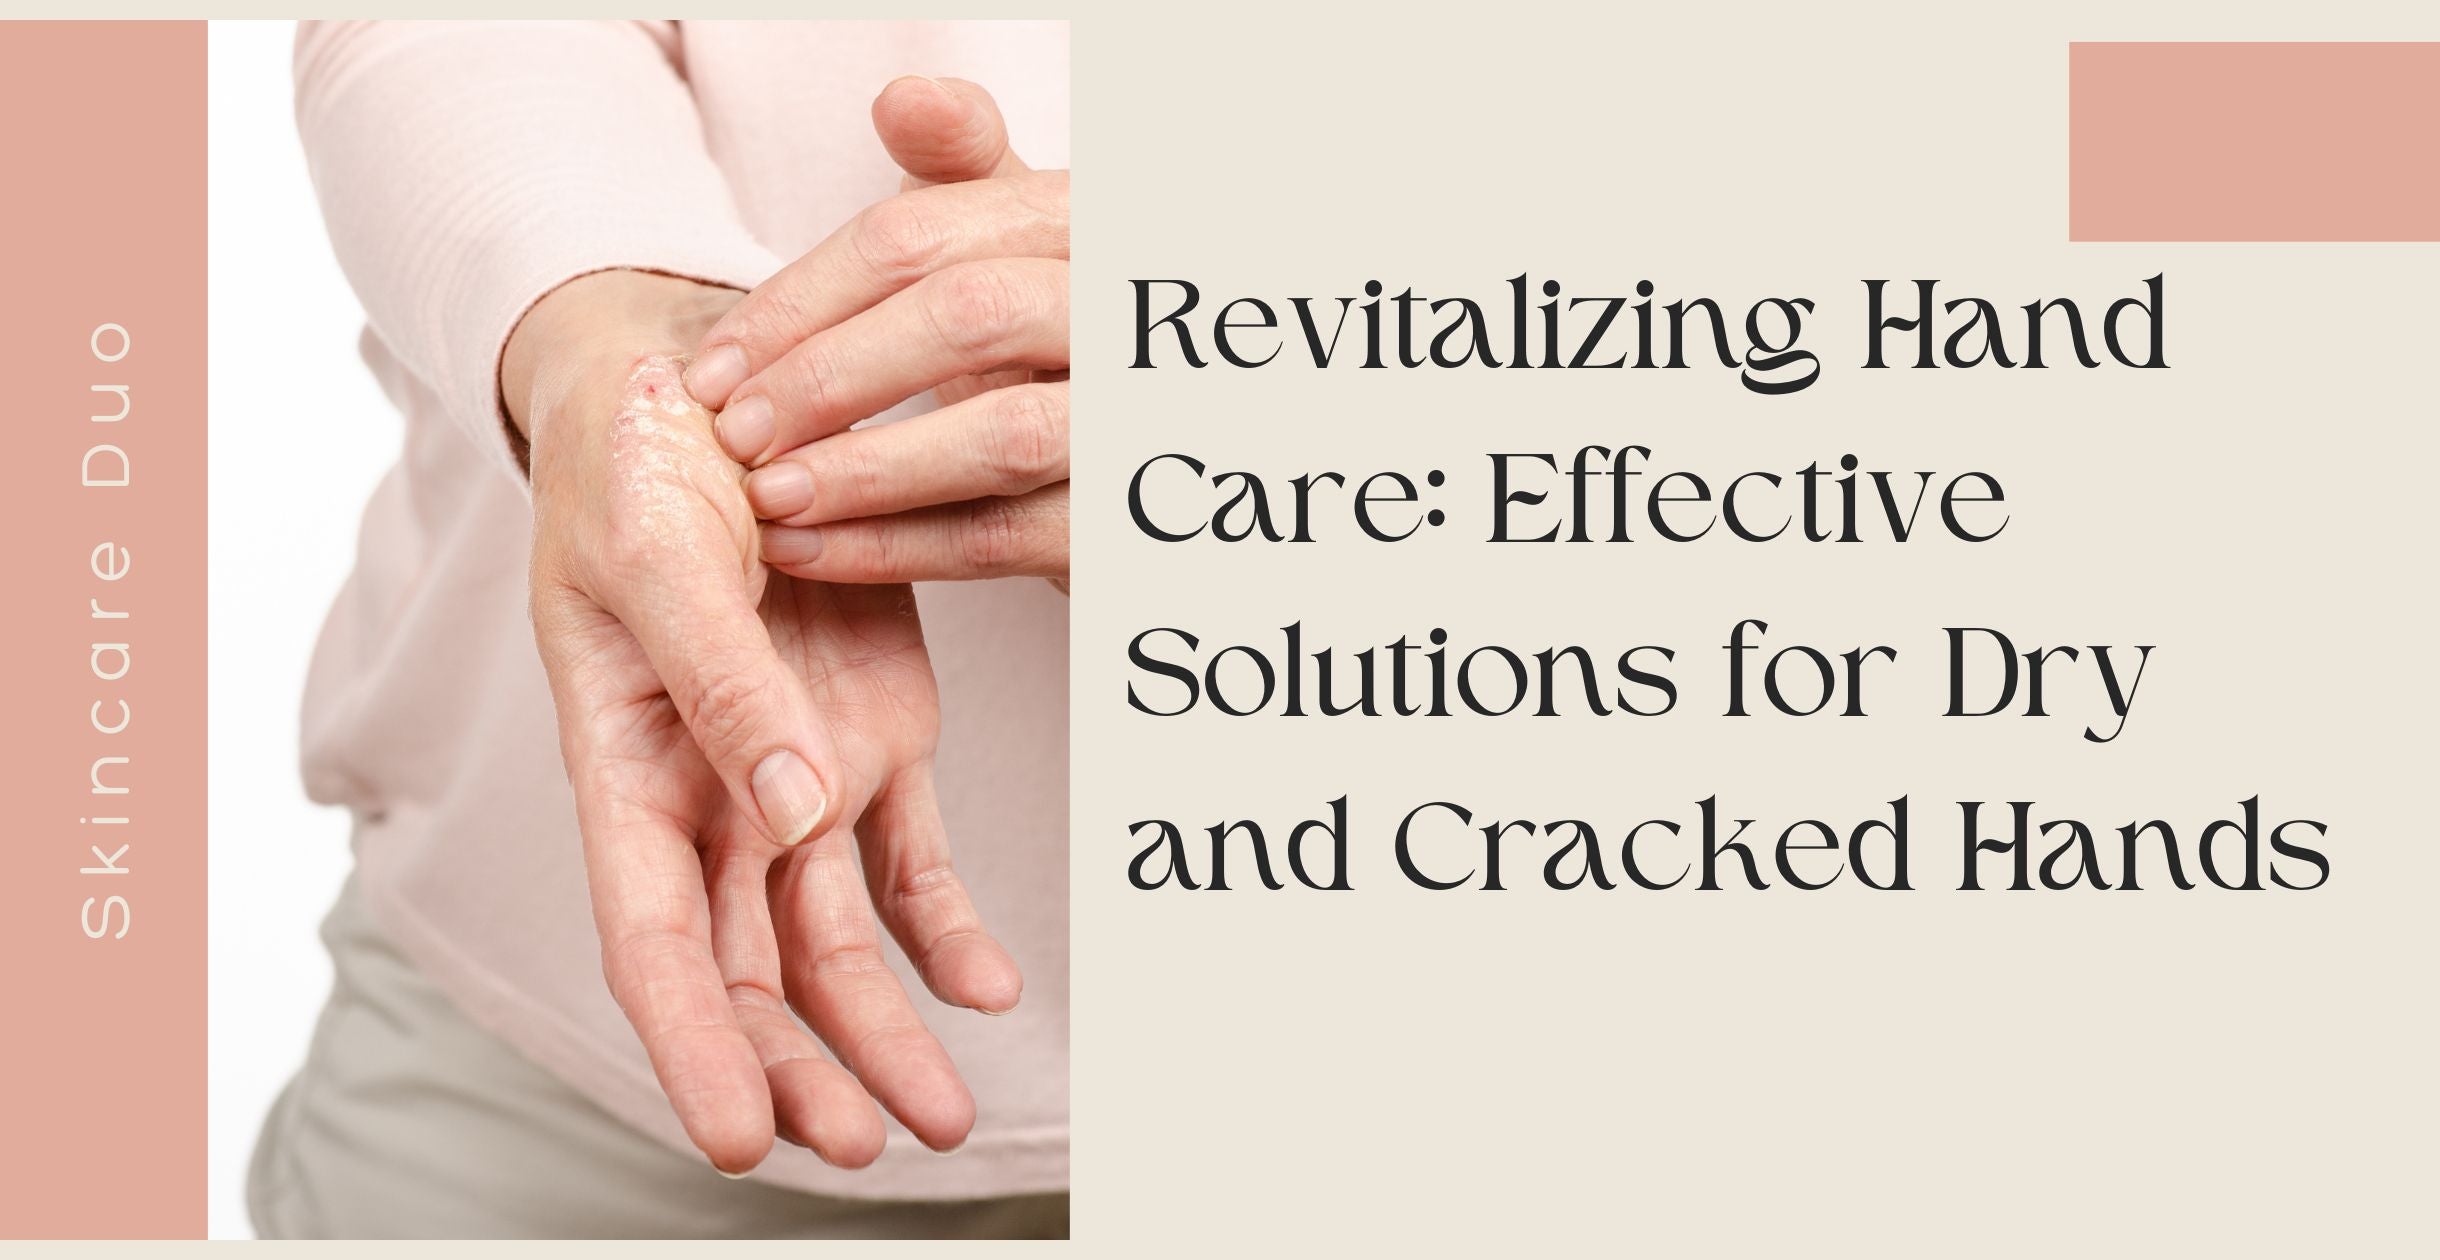 Revitalizing Hand Care: Effective Solutions for Dry and Cracked Hands